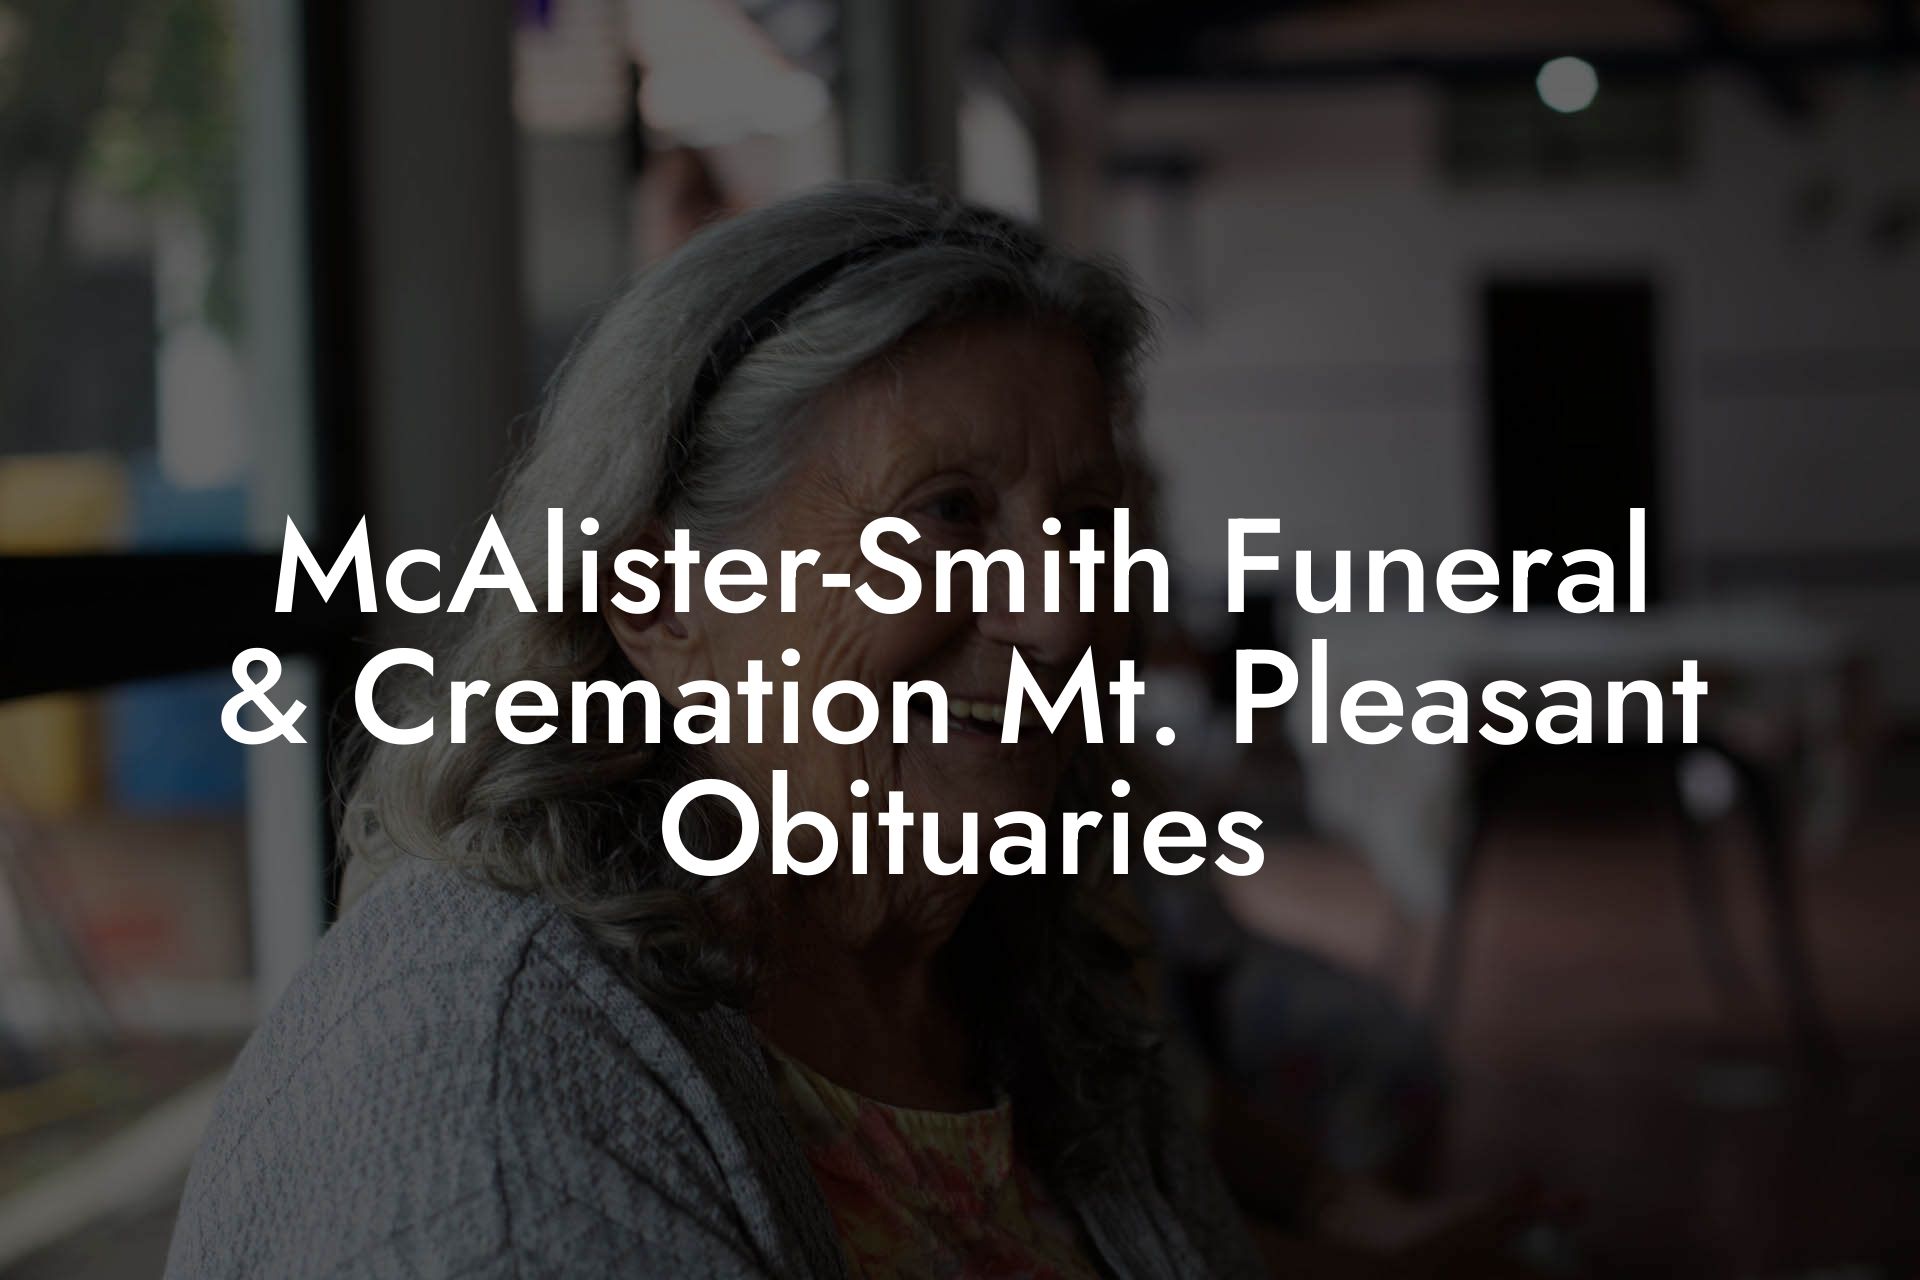 McAlister-Smith Funeral & Cremation Mt. Pleasant Obituaries